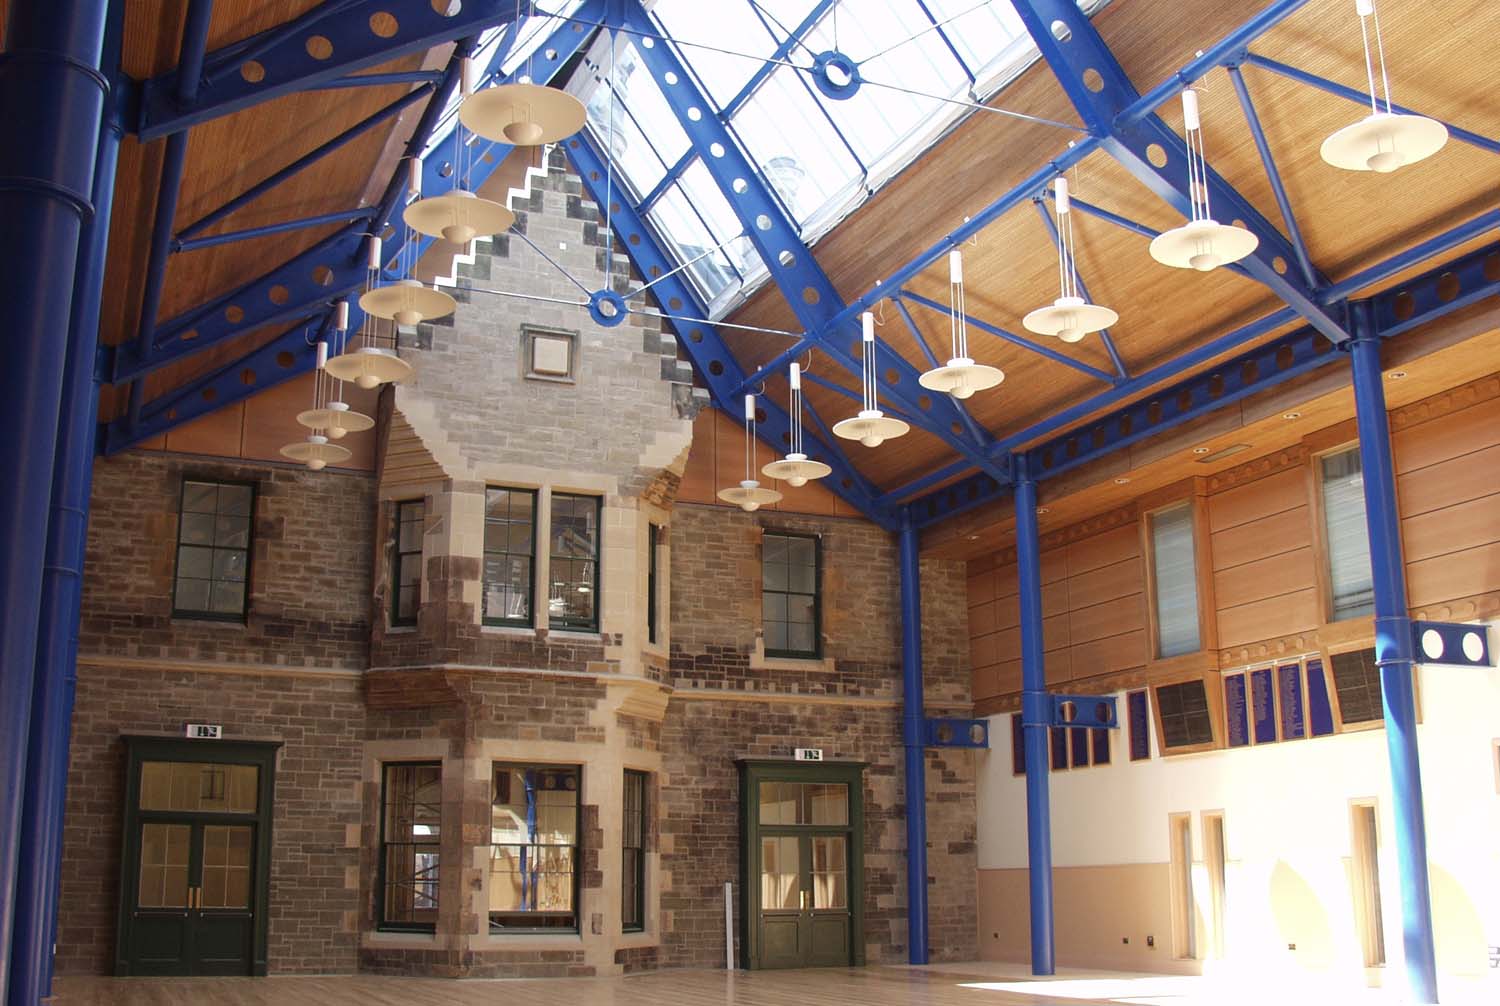 A photograph of an interior courtyard with the view of an old stone building in the background and blue columns supporting a glass roof